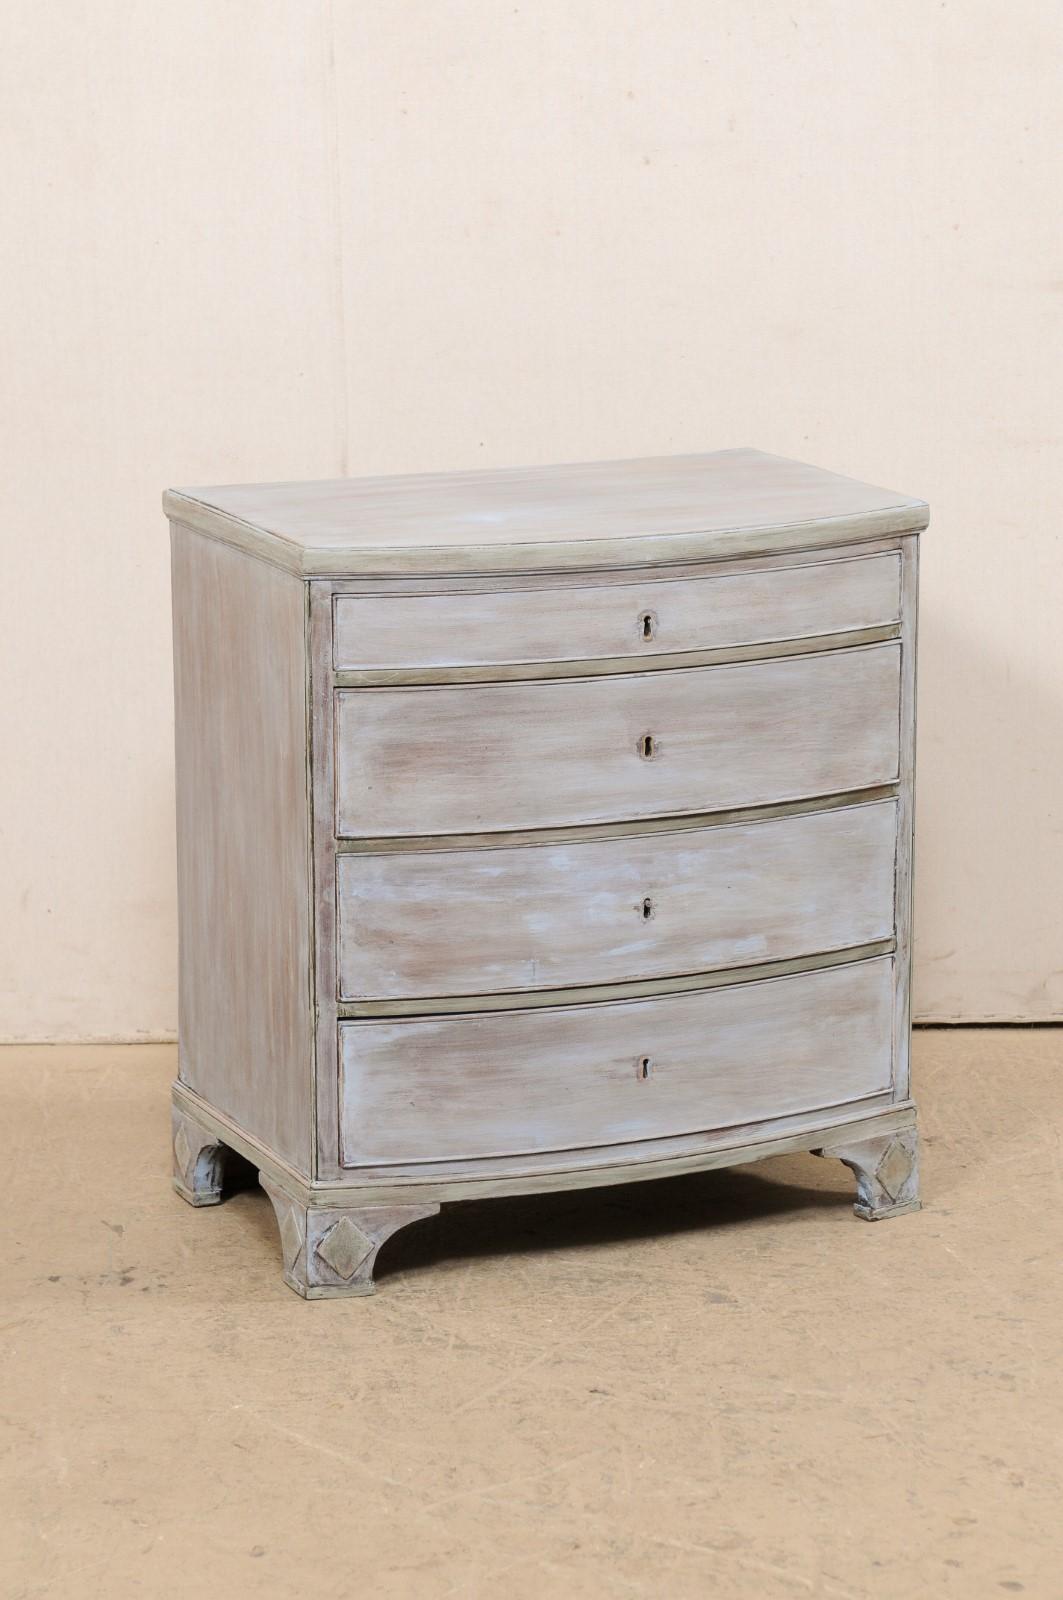 An English painted-wood, bow front chest from the early 20th century. This antique commode from England has a bow-front, with four graduated drawers, and is presented on four bracket feet with raised diamond accents carved on their outer sides.